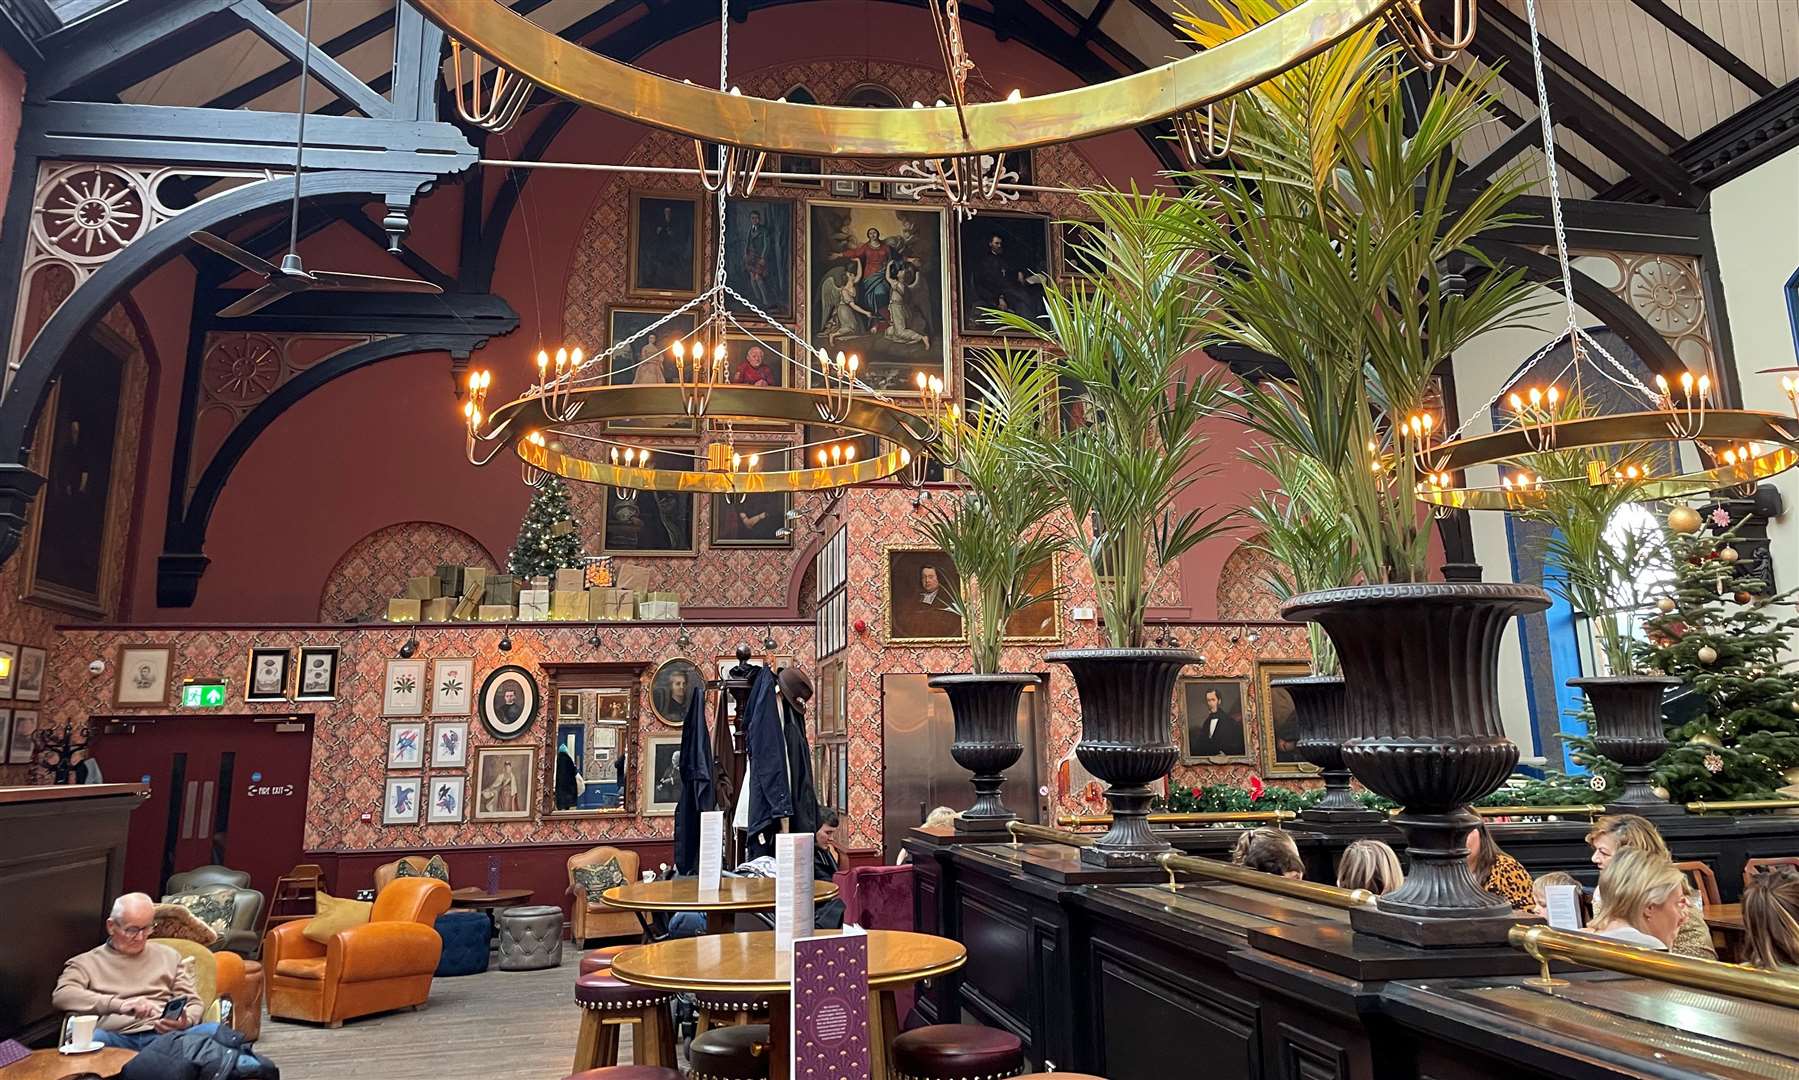 The Cosy Club restaurants are known for their colourful and eccentric interiors